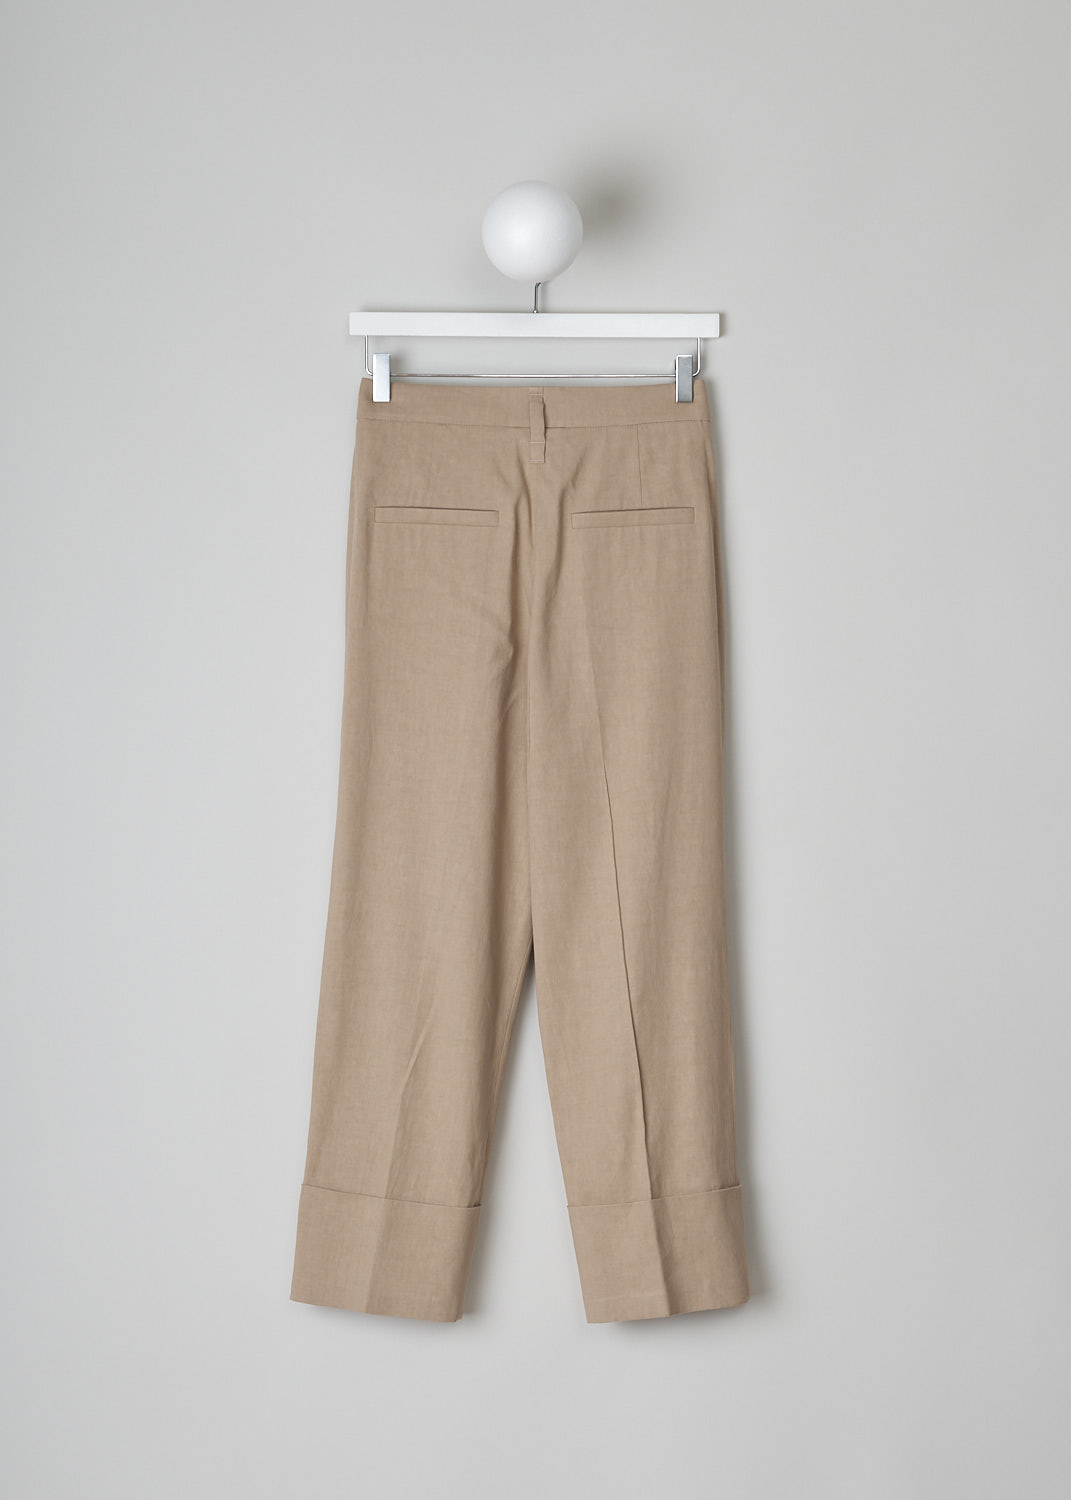 BRUNELLO CUCINELLI, DUSKY PINK LINEN-BLEND PANTS, MF591P7231_C7914, Pink, Back, These dusky pink linen-blend pants have a waistband with belt loops and a concealed clasp and zip closure. The pants have tapered pant legs with pressed centre creases and a broad folded hem. These pants have slanted pockets in the front and welt pockets in the back.
